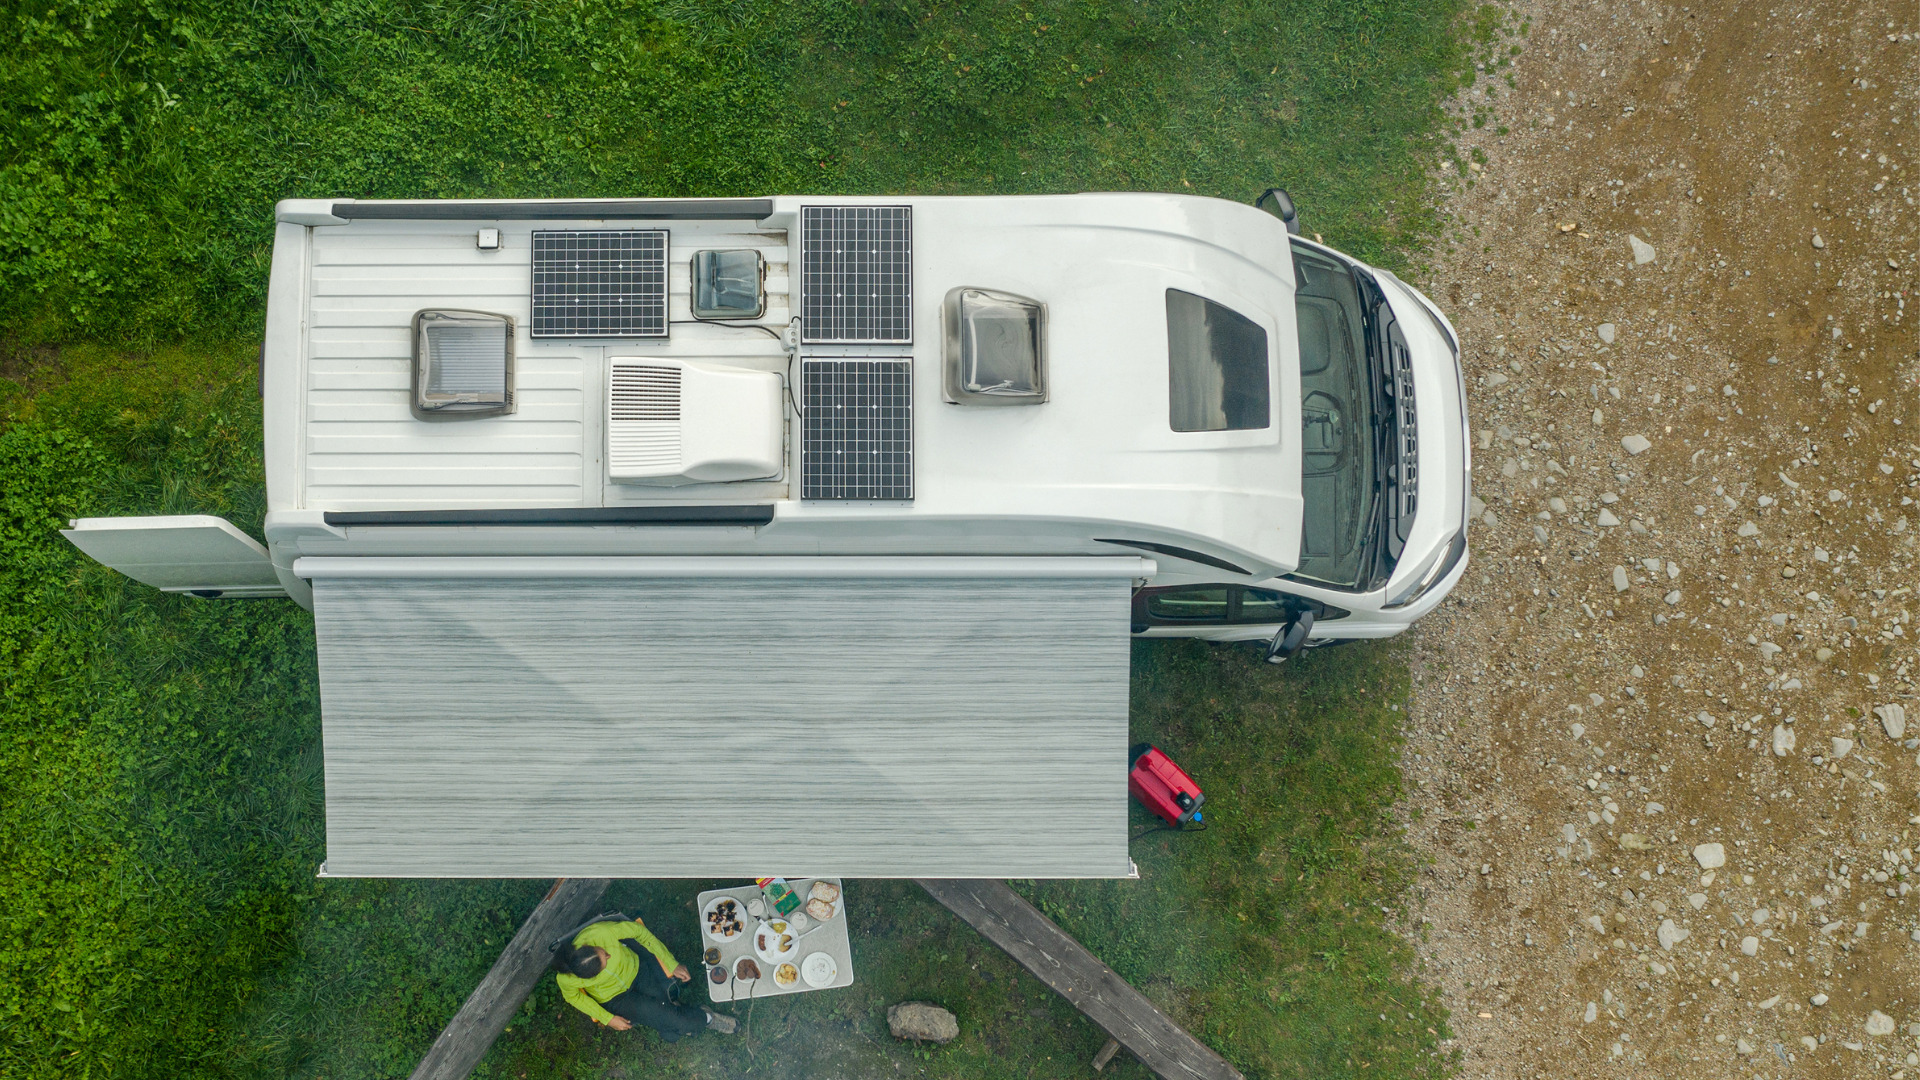 Can You Power An Rv With A Solar Generator Getaway Couple